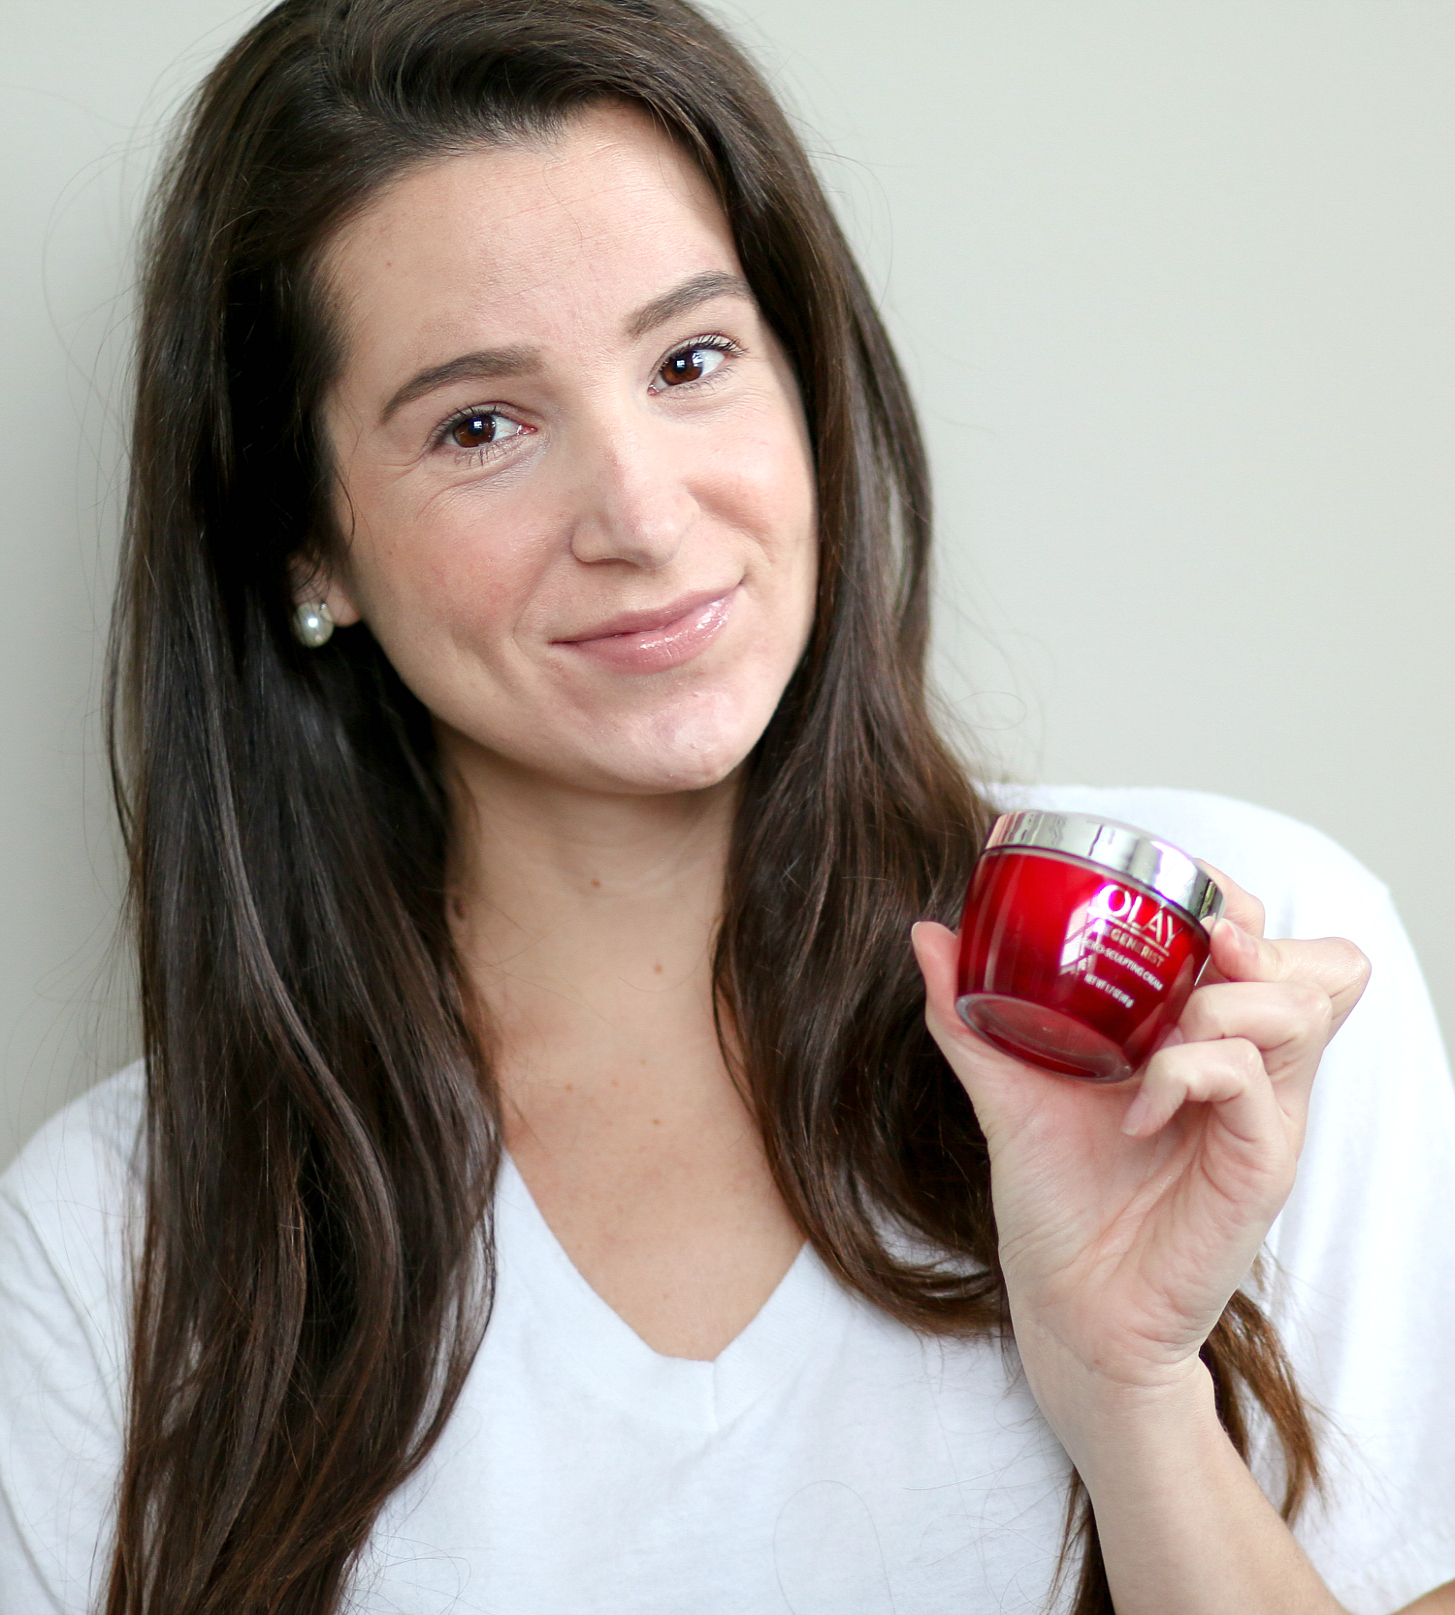 Affordable Anti-Aging Products That Work: Olay Regenerist Micro Sculpting Cream